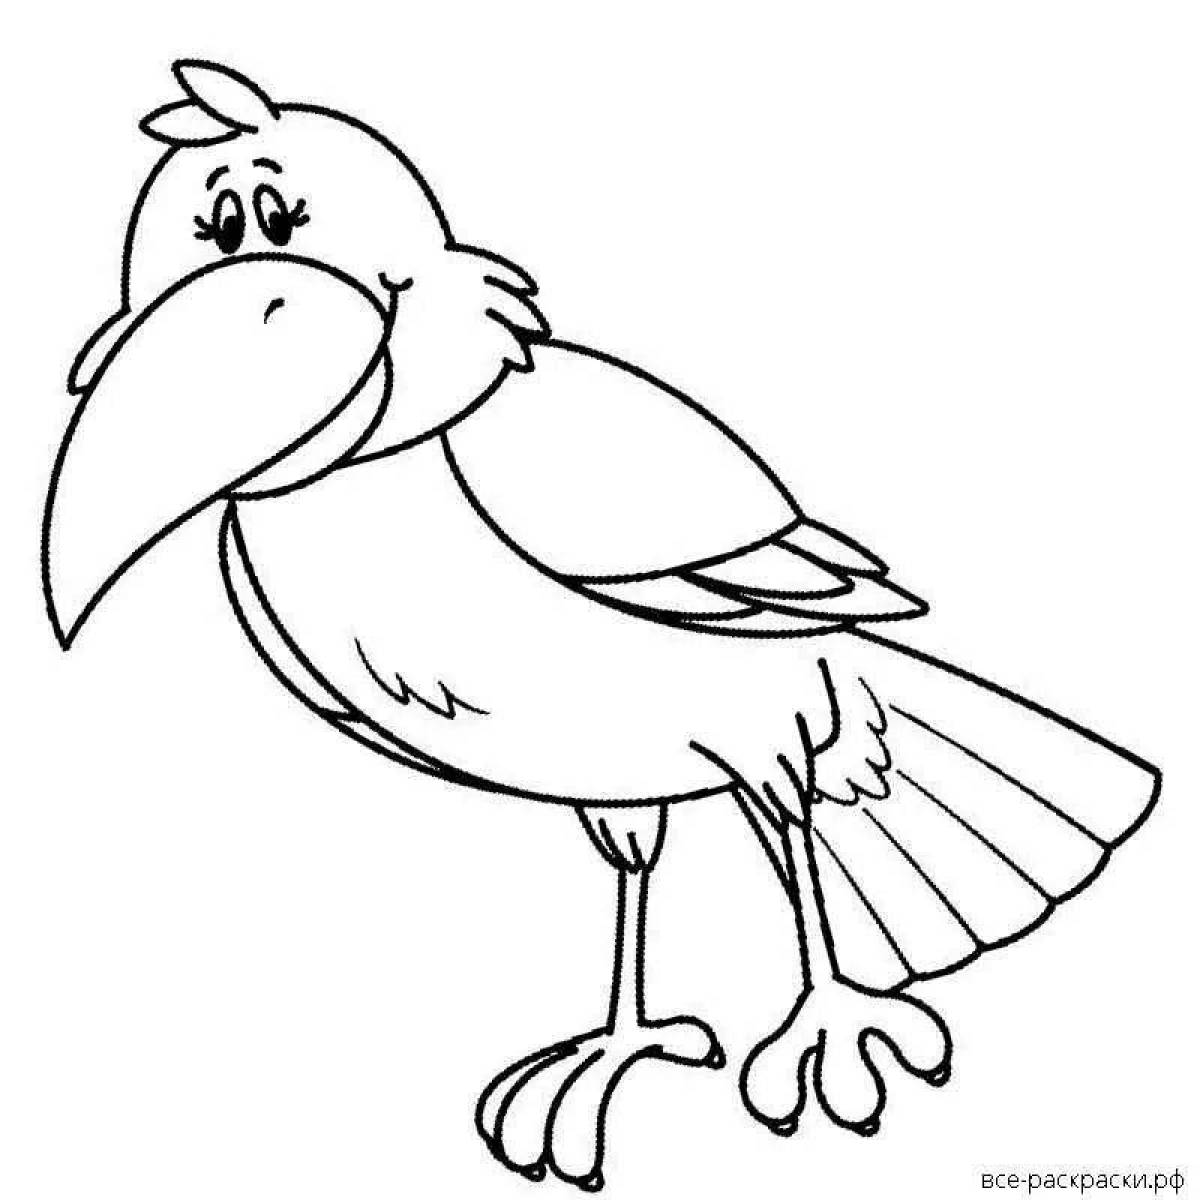 Crow picture for kids #2